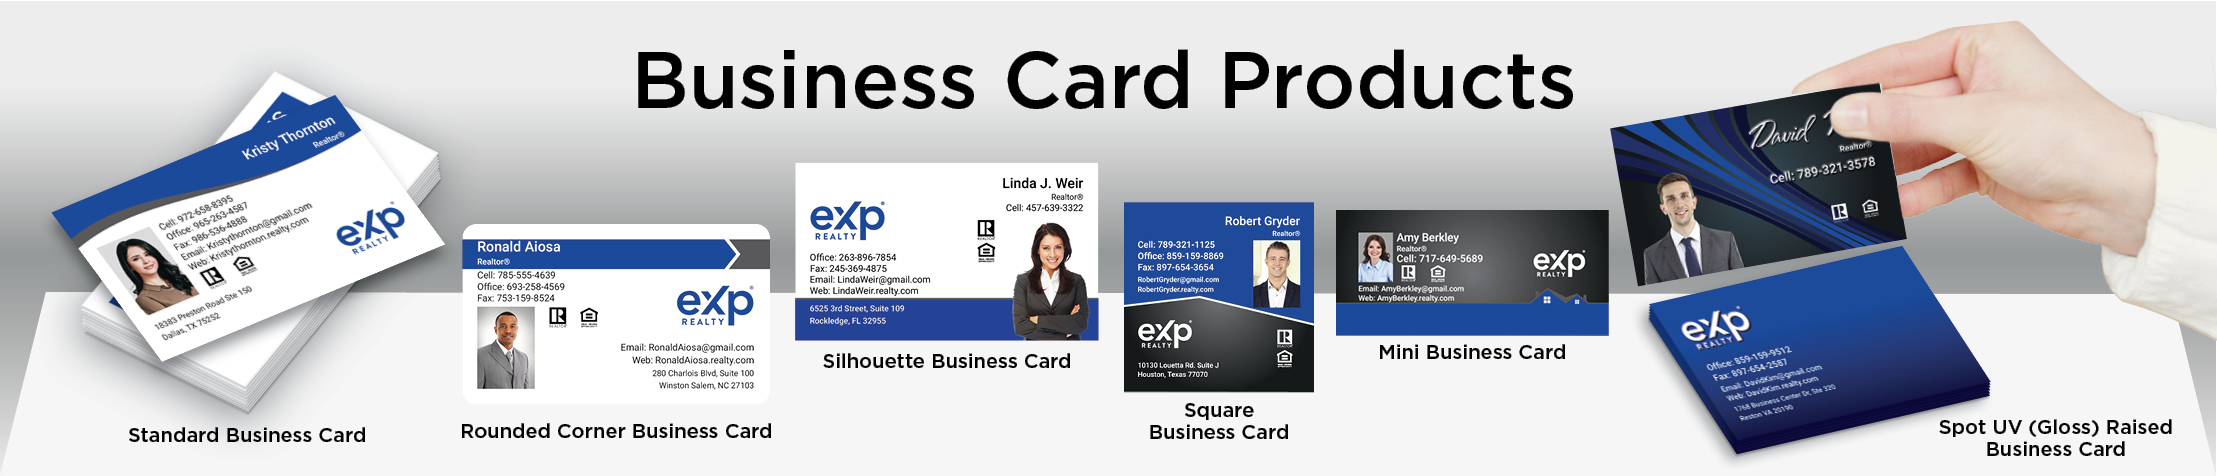 eXp Realty Real Estate Business Card Products - eXp Realty  - Unique, Custom Business Cards Printed on Quality Stock with Creative Designs for Realtors | BestPrintBuy.com